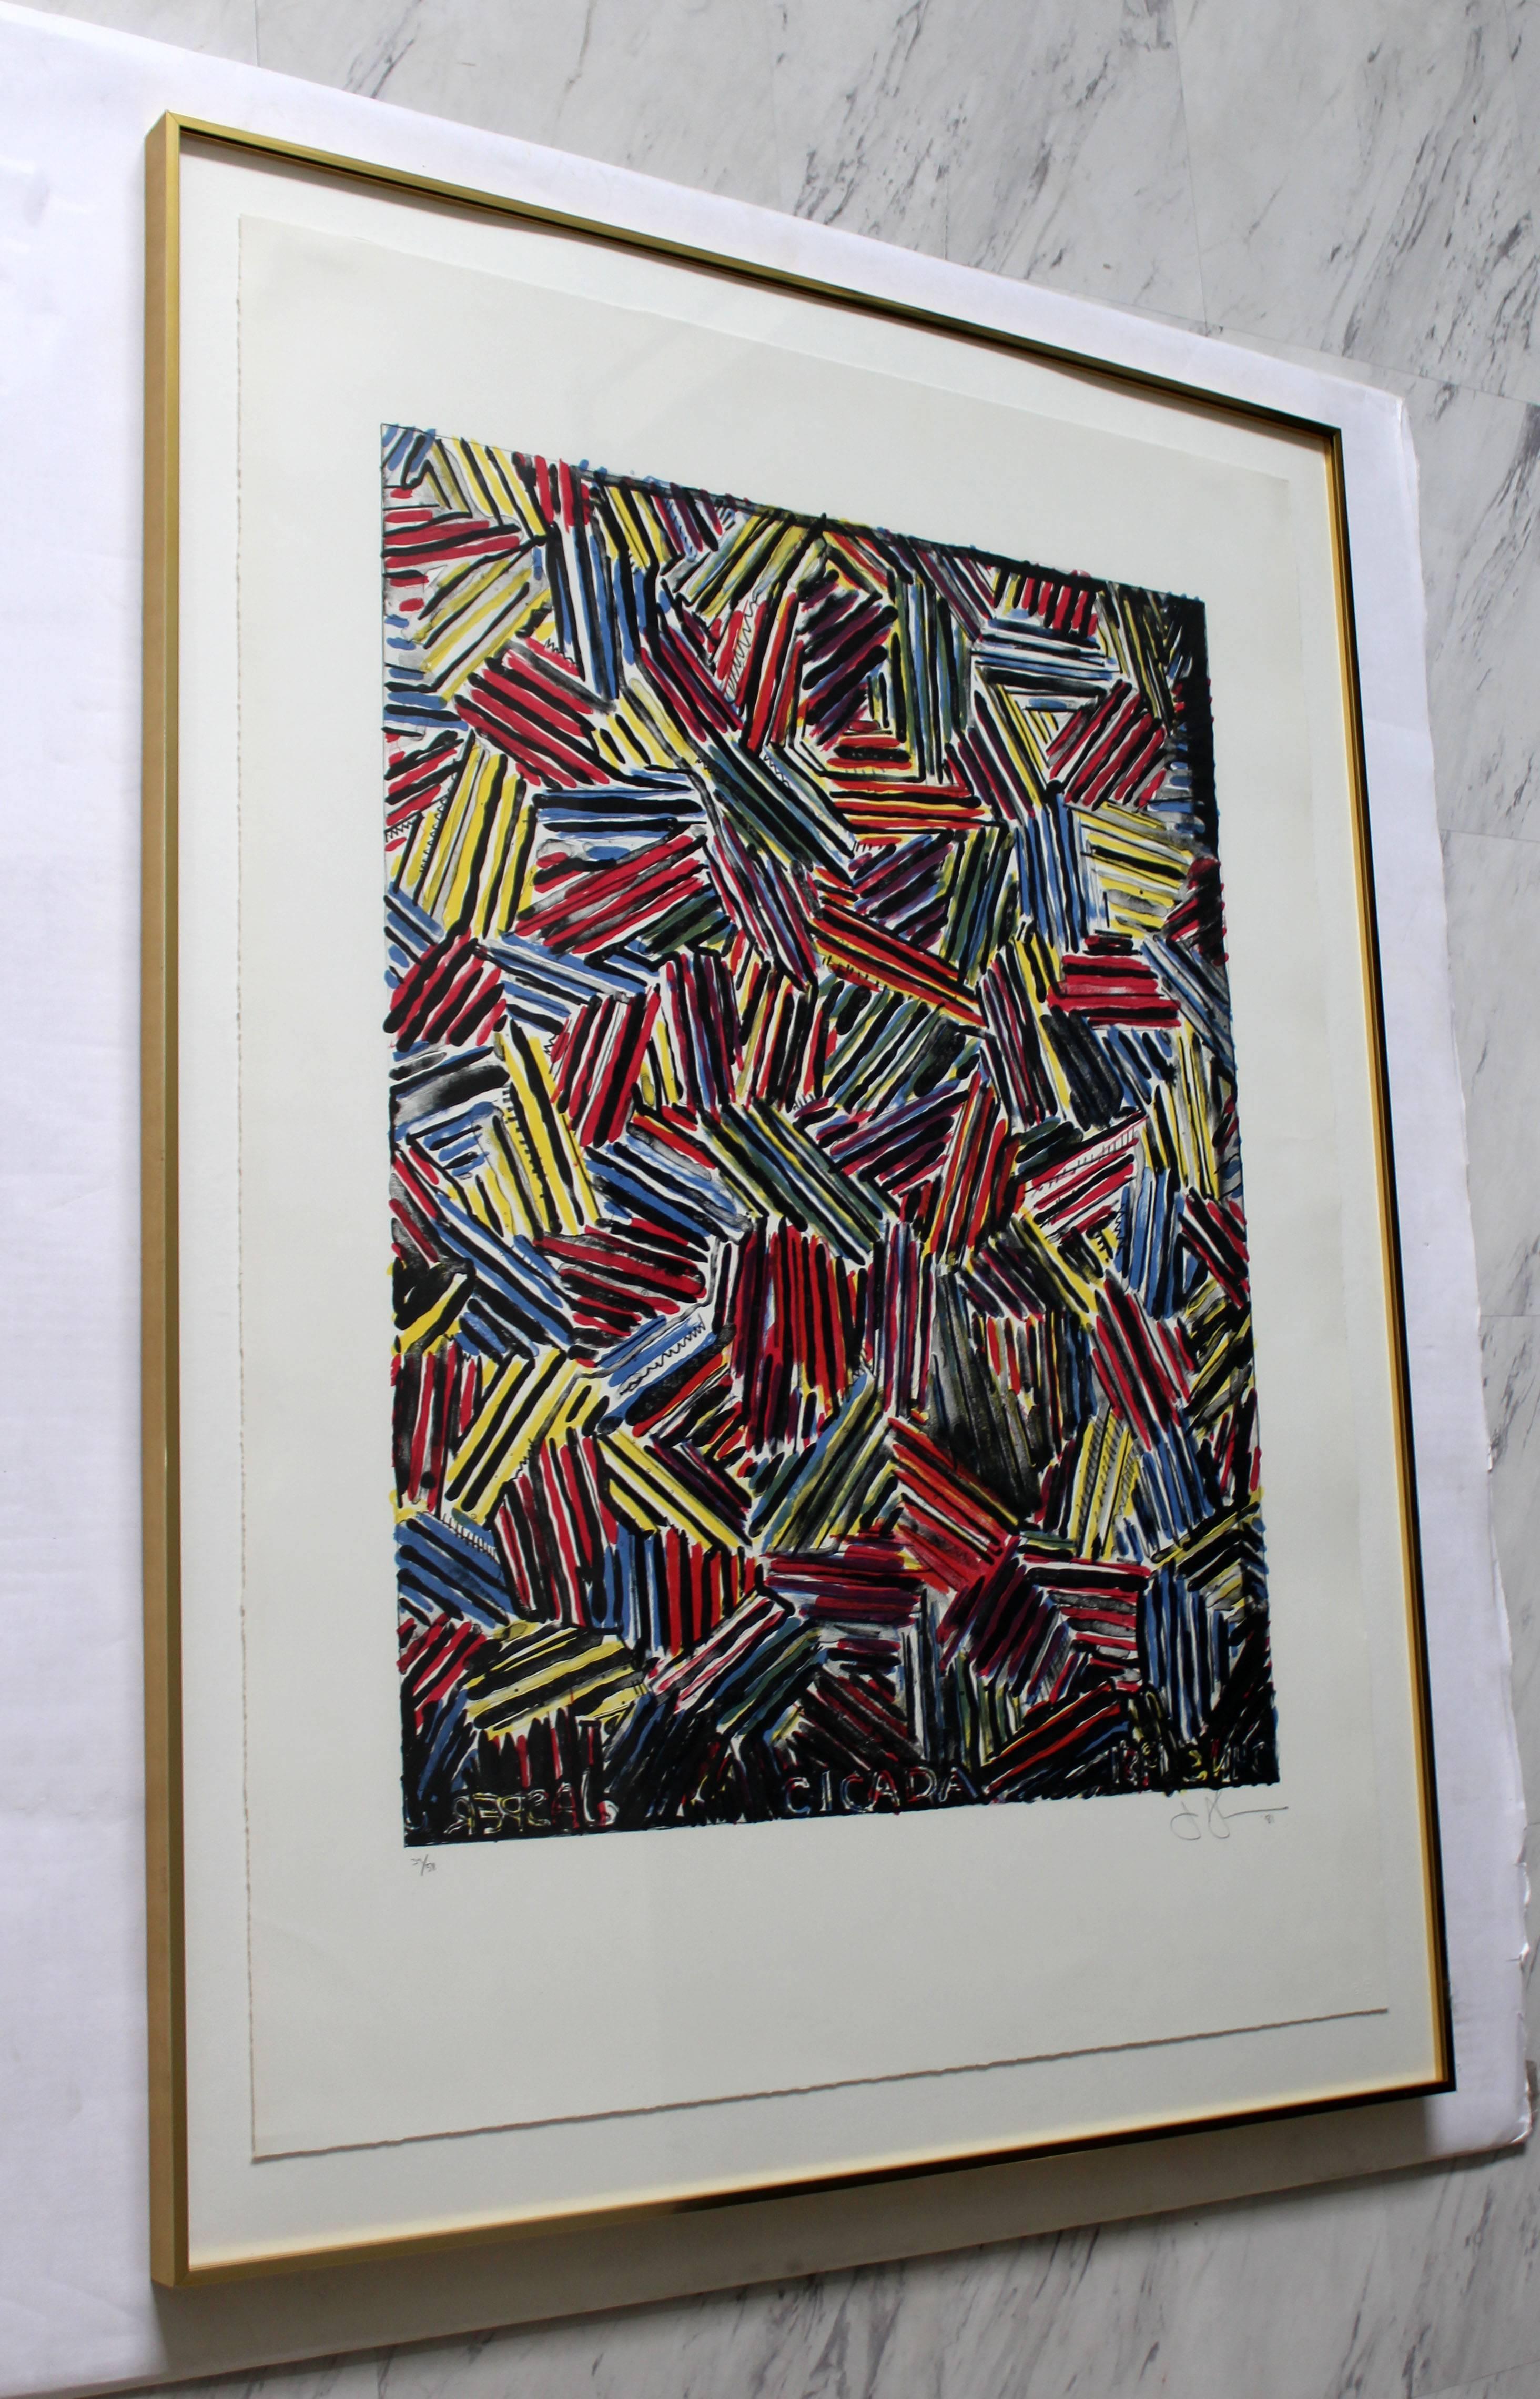 For your consideration is a color lithograph of Jasper Johns' 